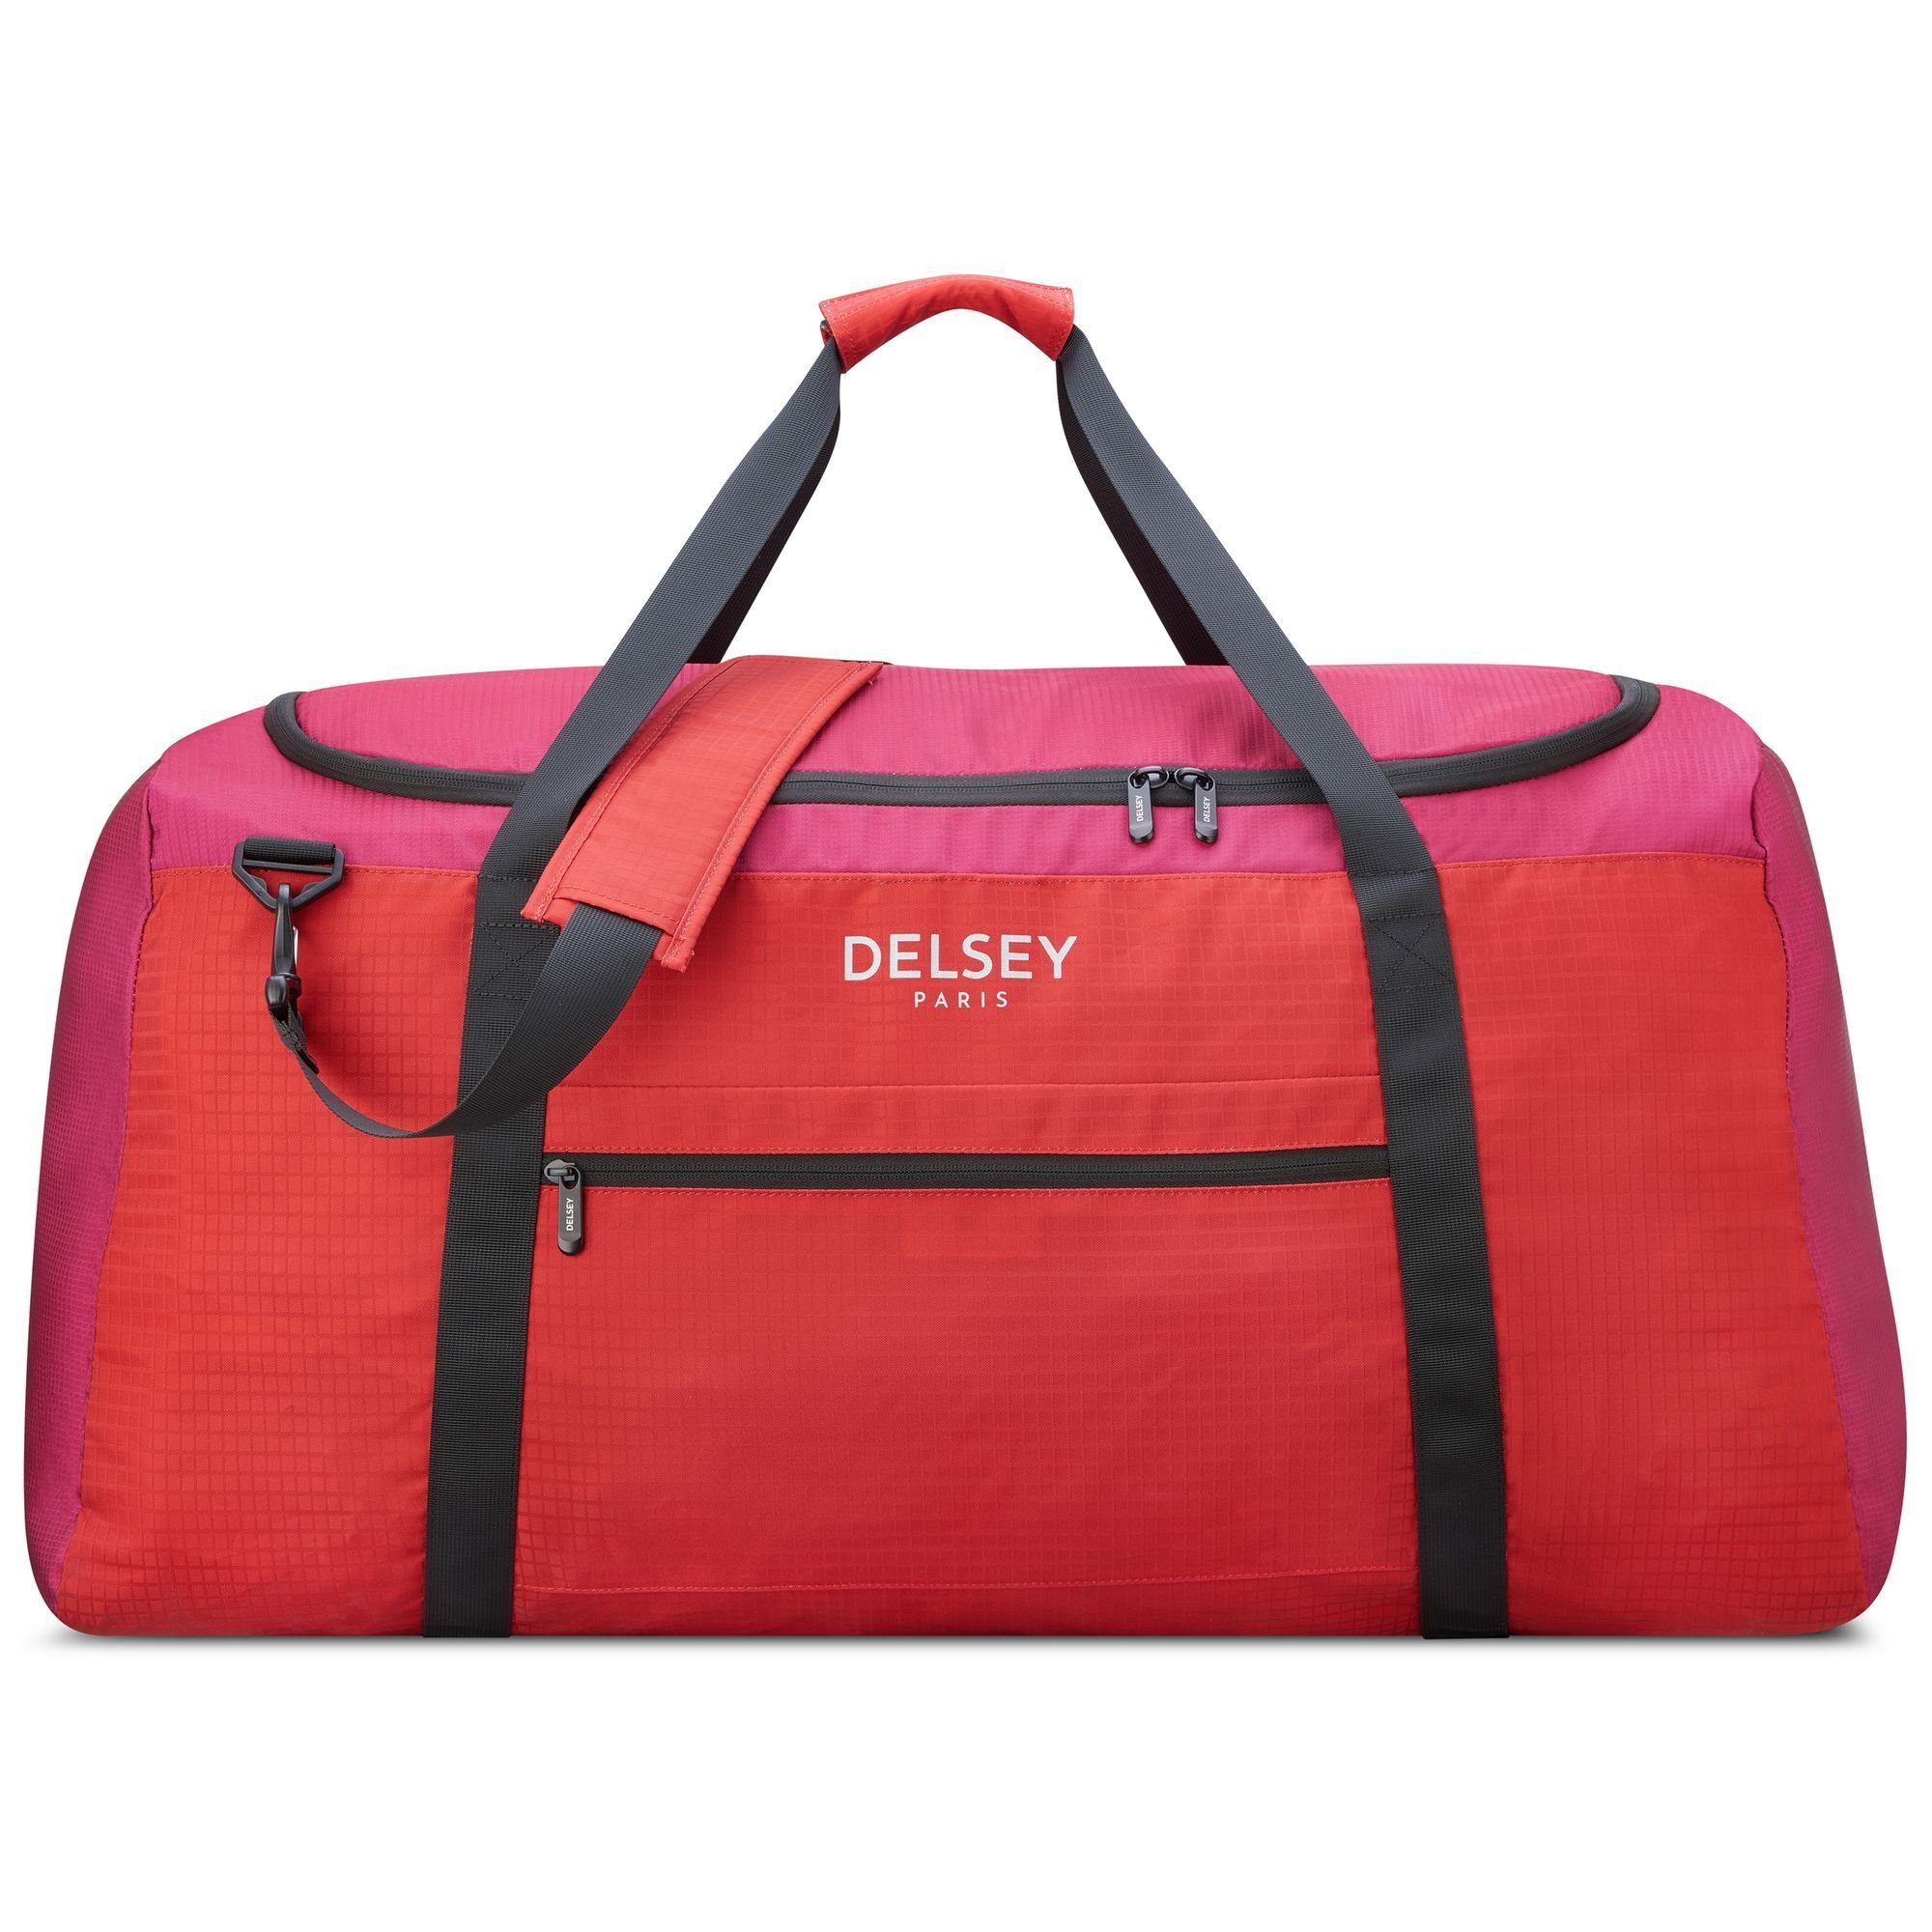 Delsey Reisetasche Nomade, Polyester paonie